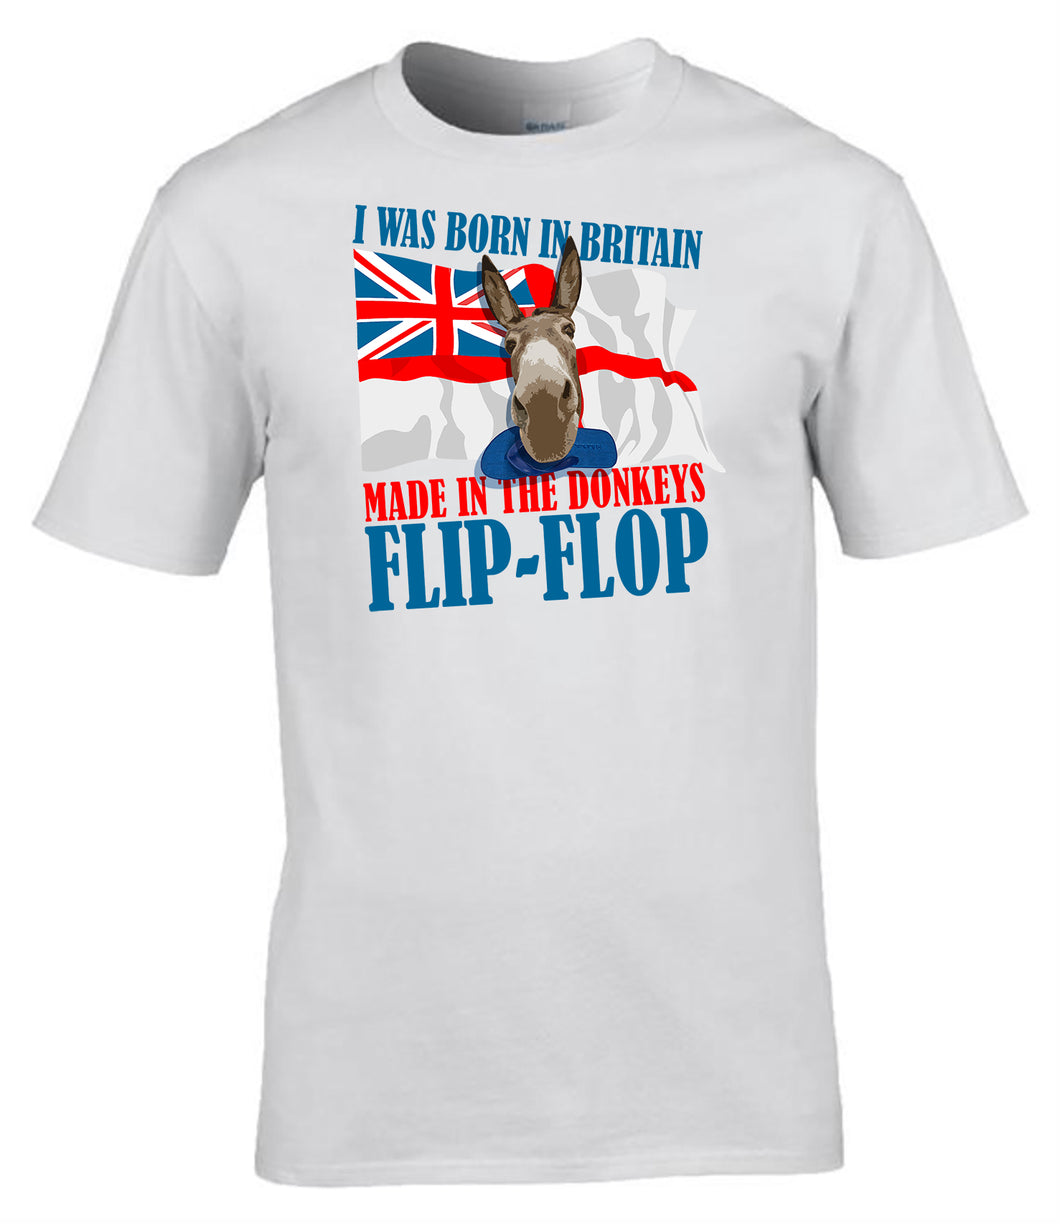 Military Humor - Royal Navy - The Donkey's Flip-Flop